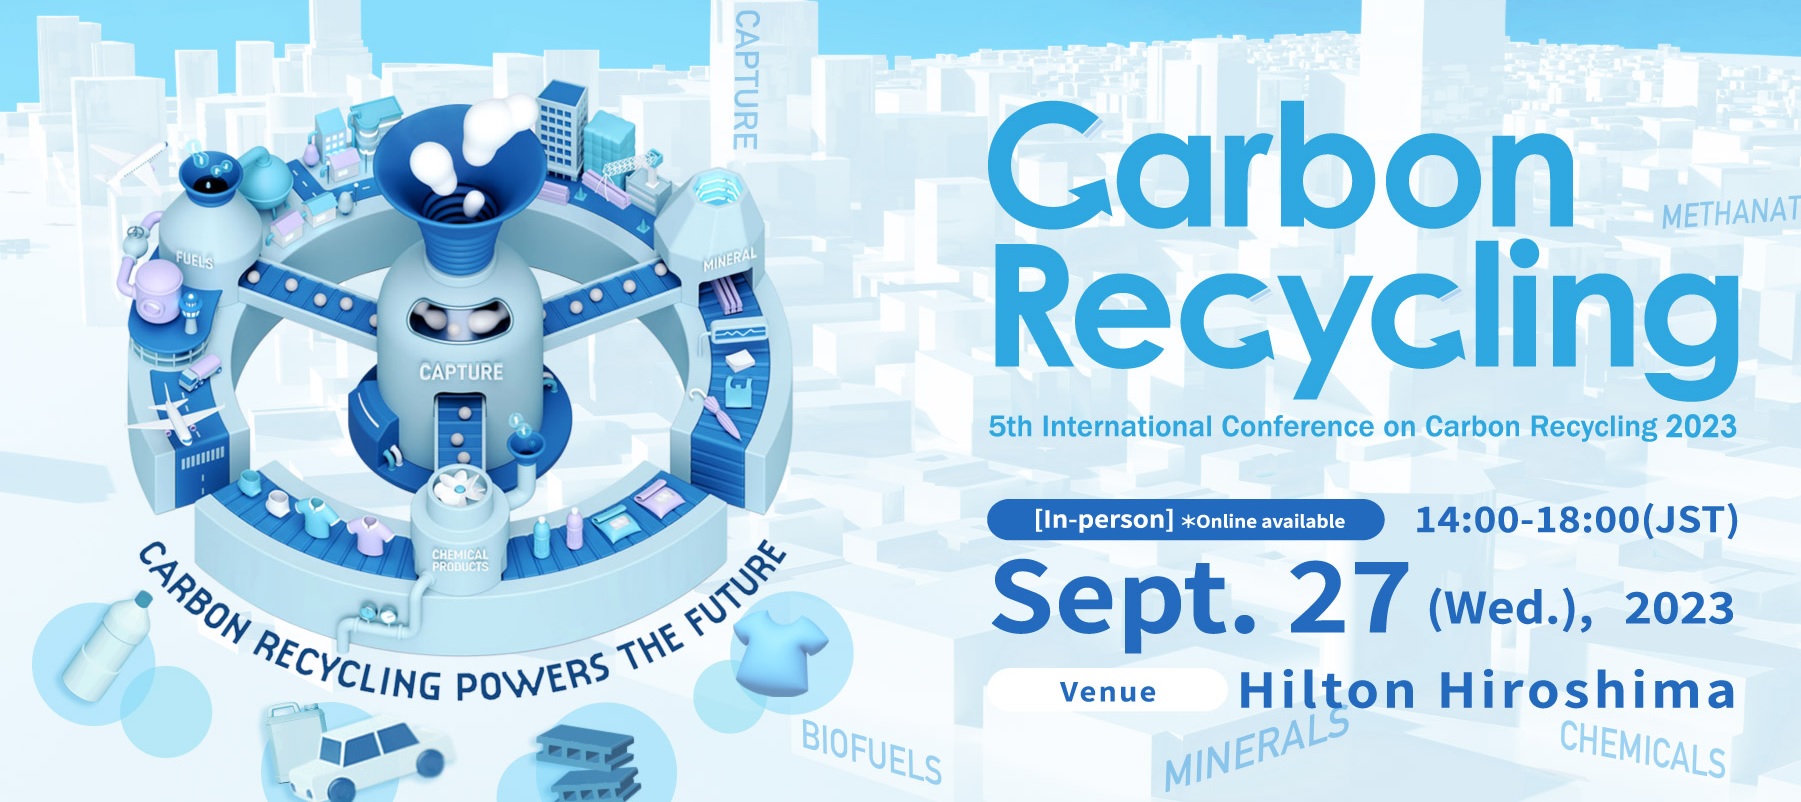 5th International Conference on Carbon Recycling 2023 R&D and